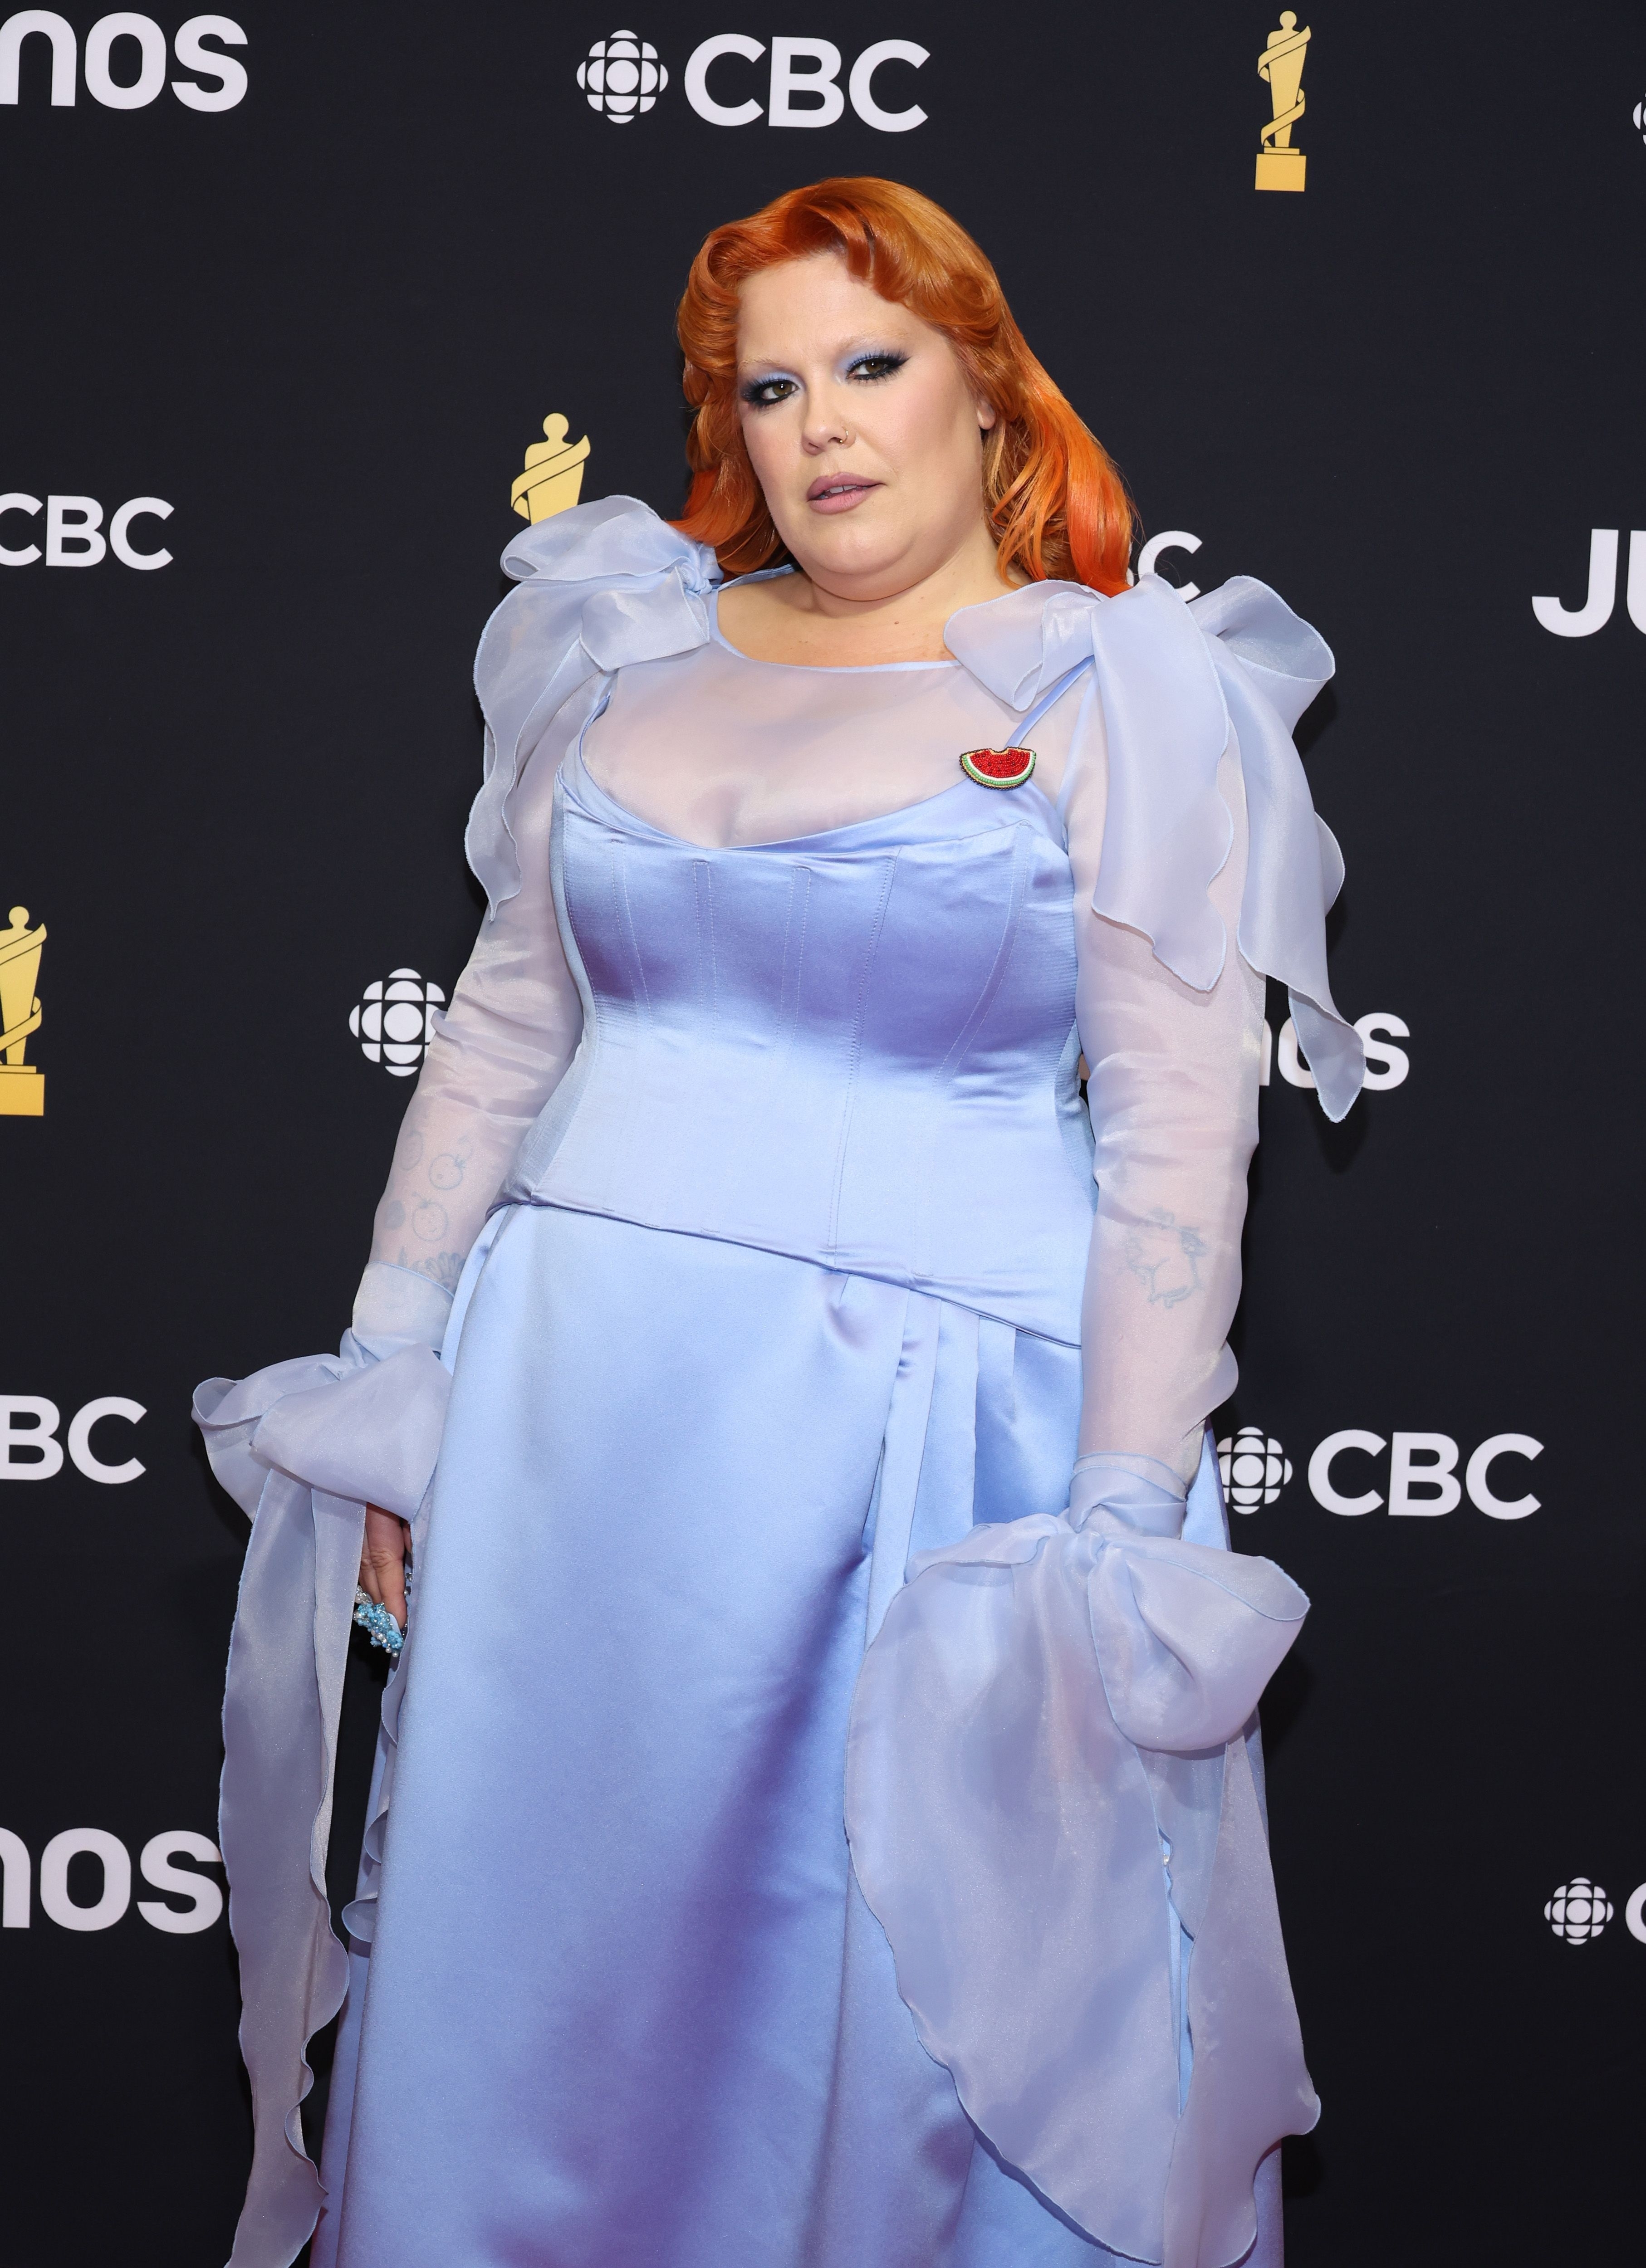 Person posing in a blue gown with sheer sleeves and ruffle details, sporting red hair